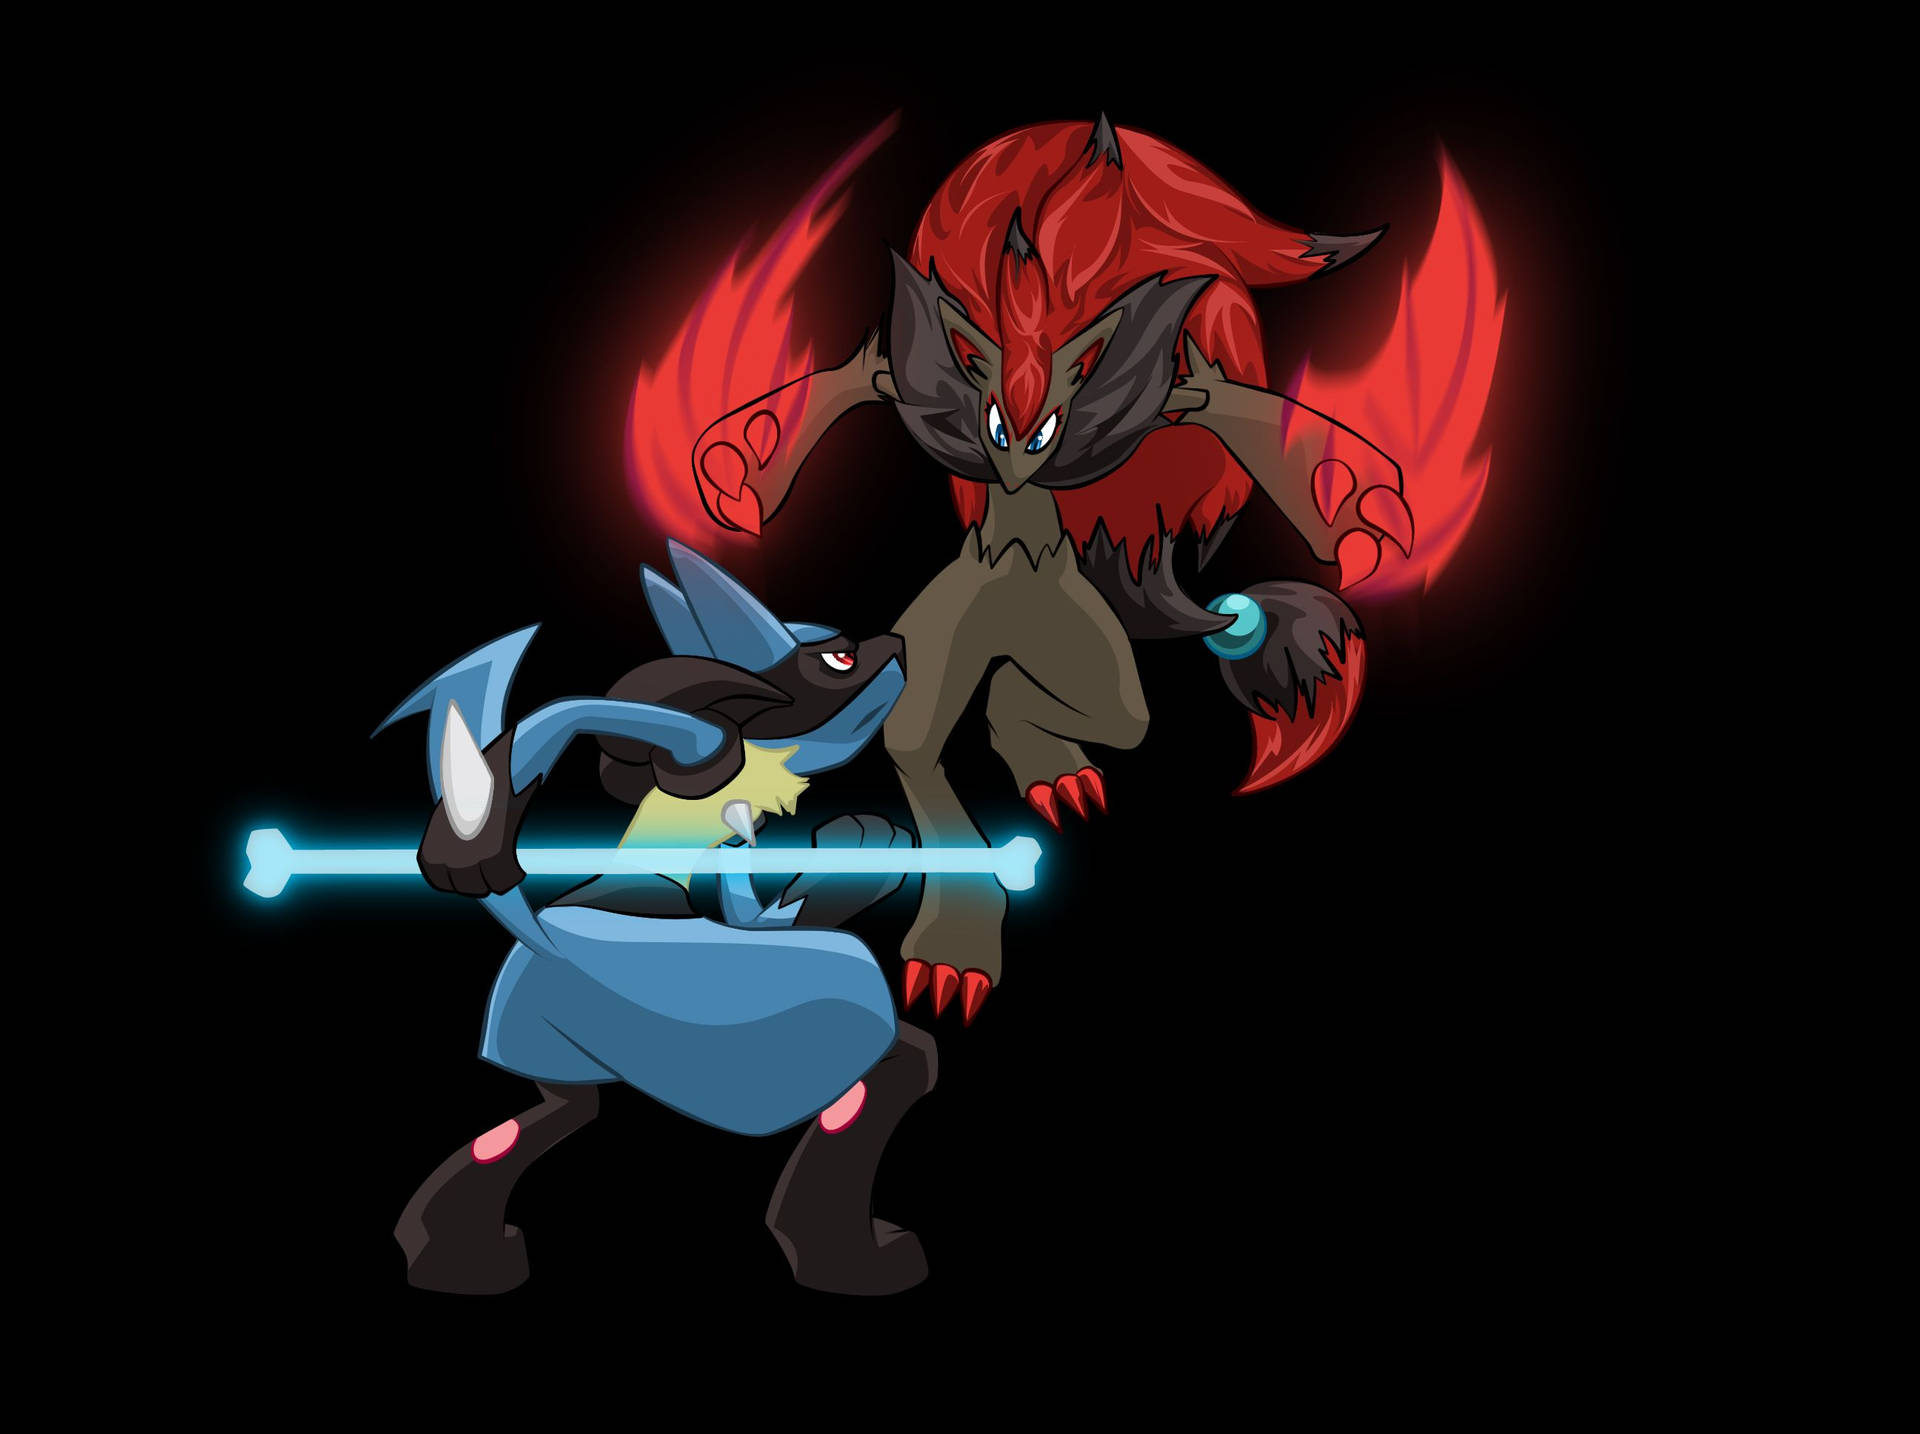 Get Ready For The Battle - Lucario In Fight